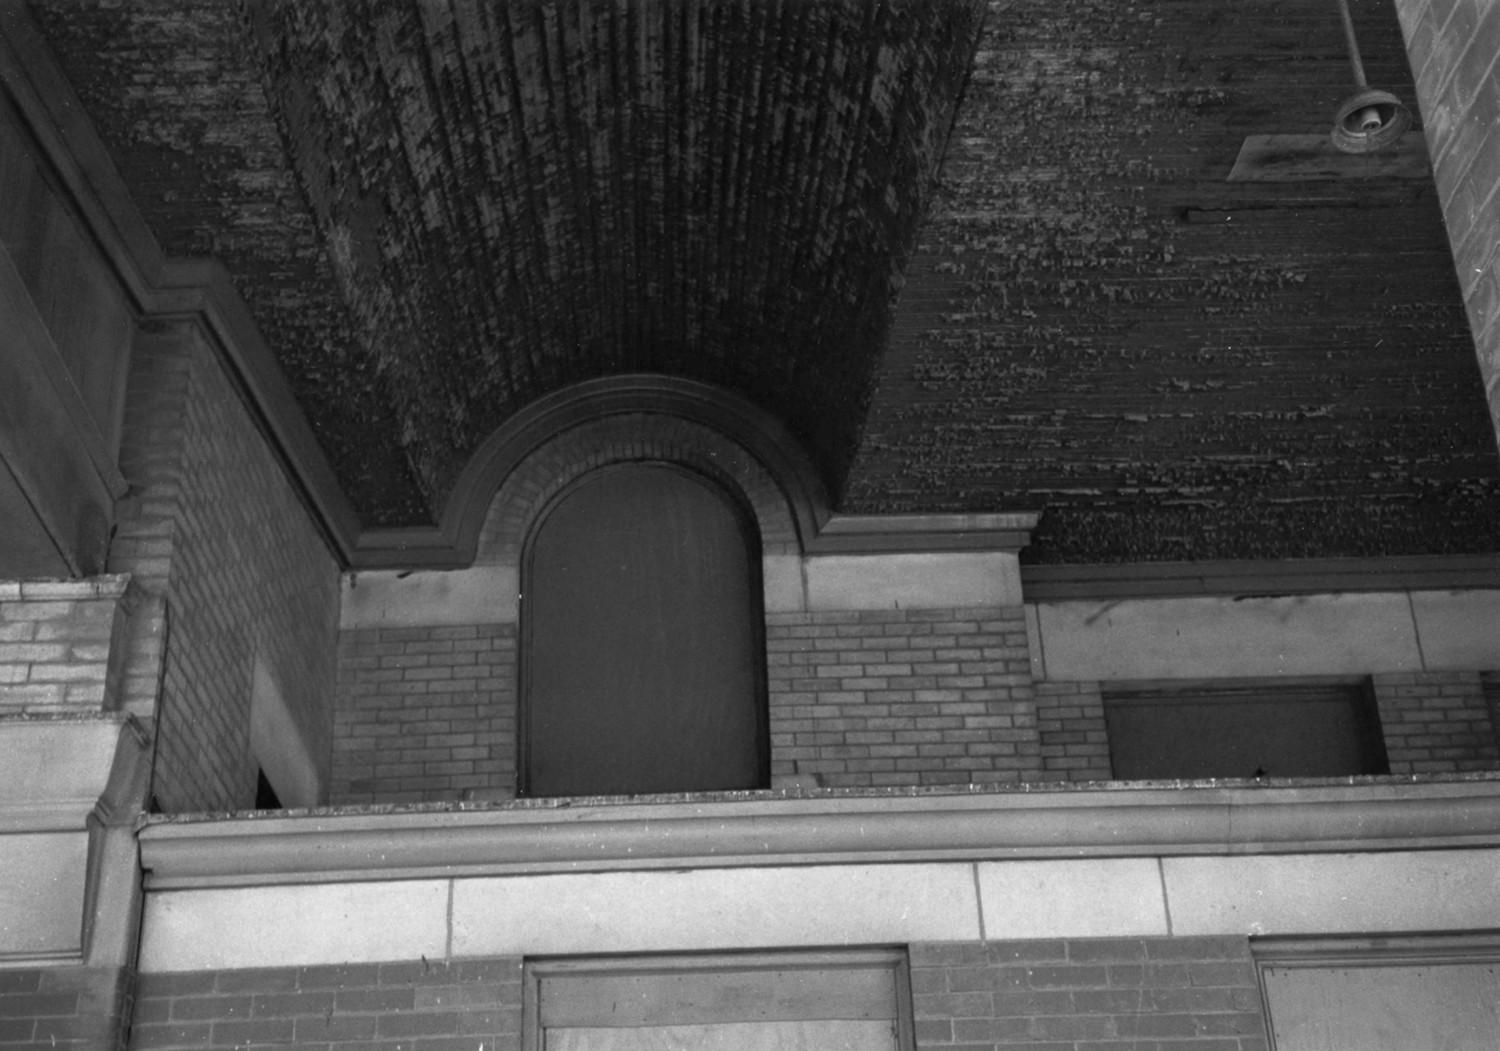 Union Station, Springfield Illinois Underside of canopy north side (1977)